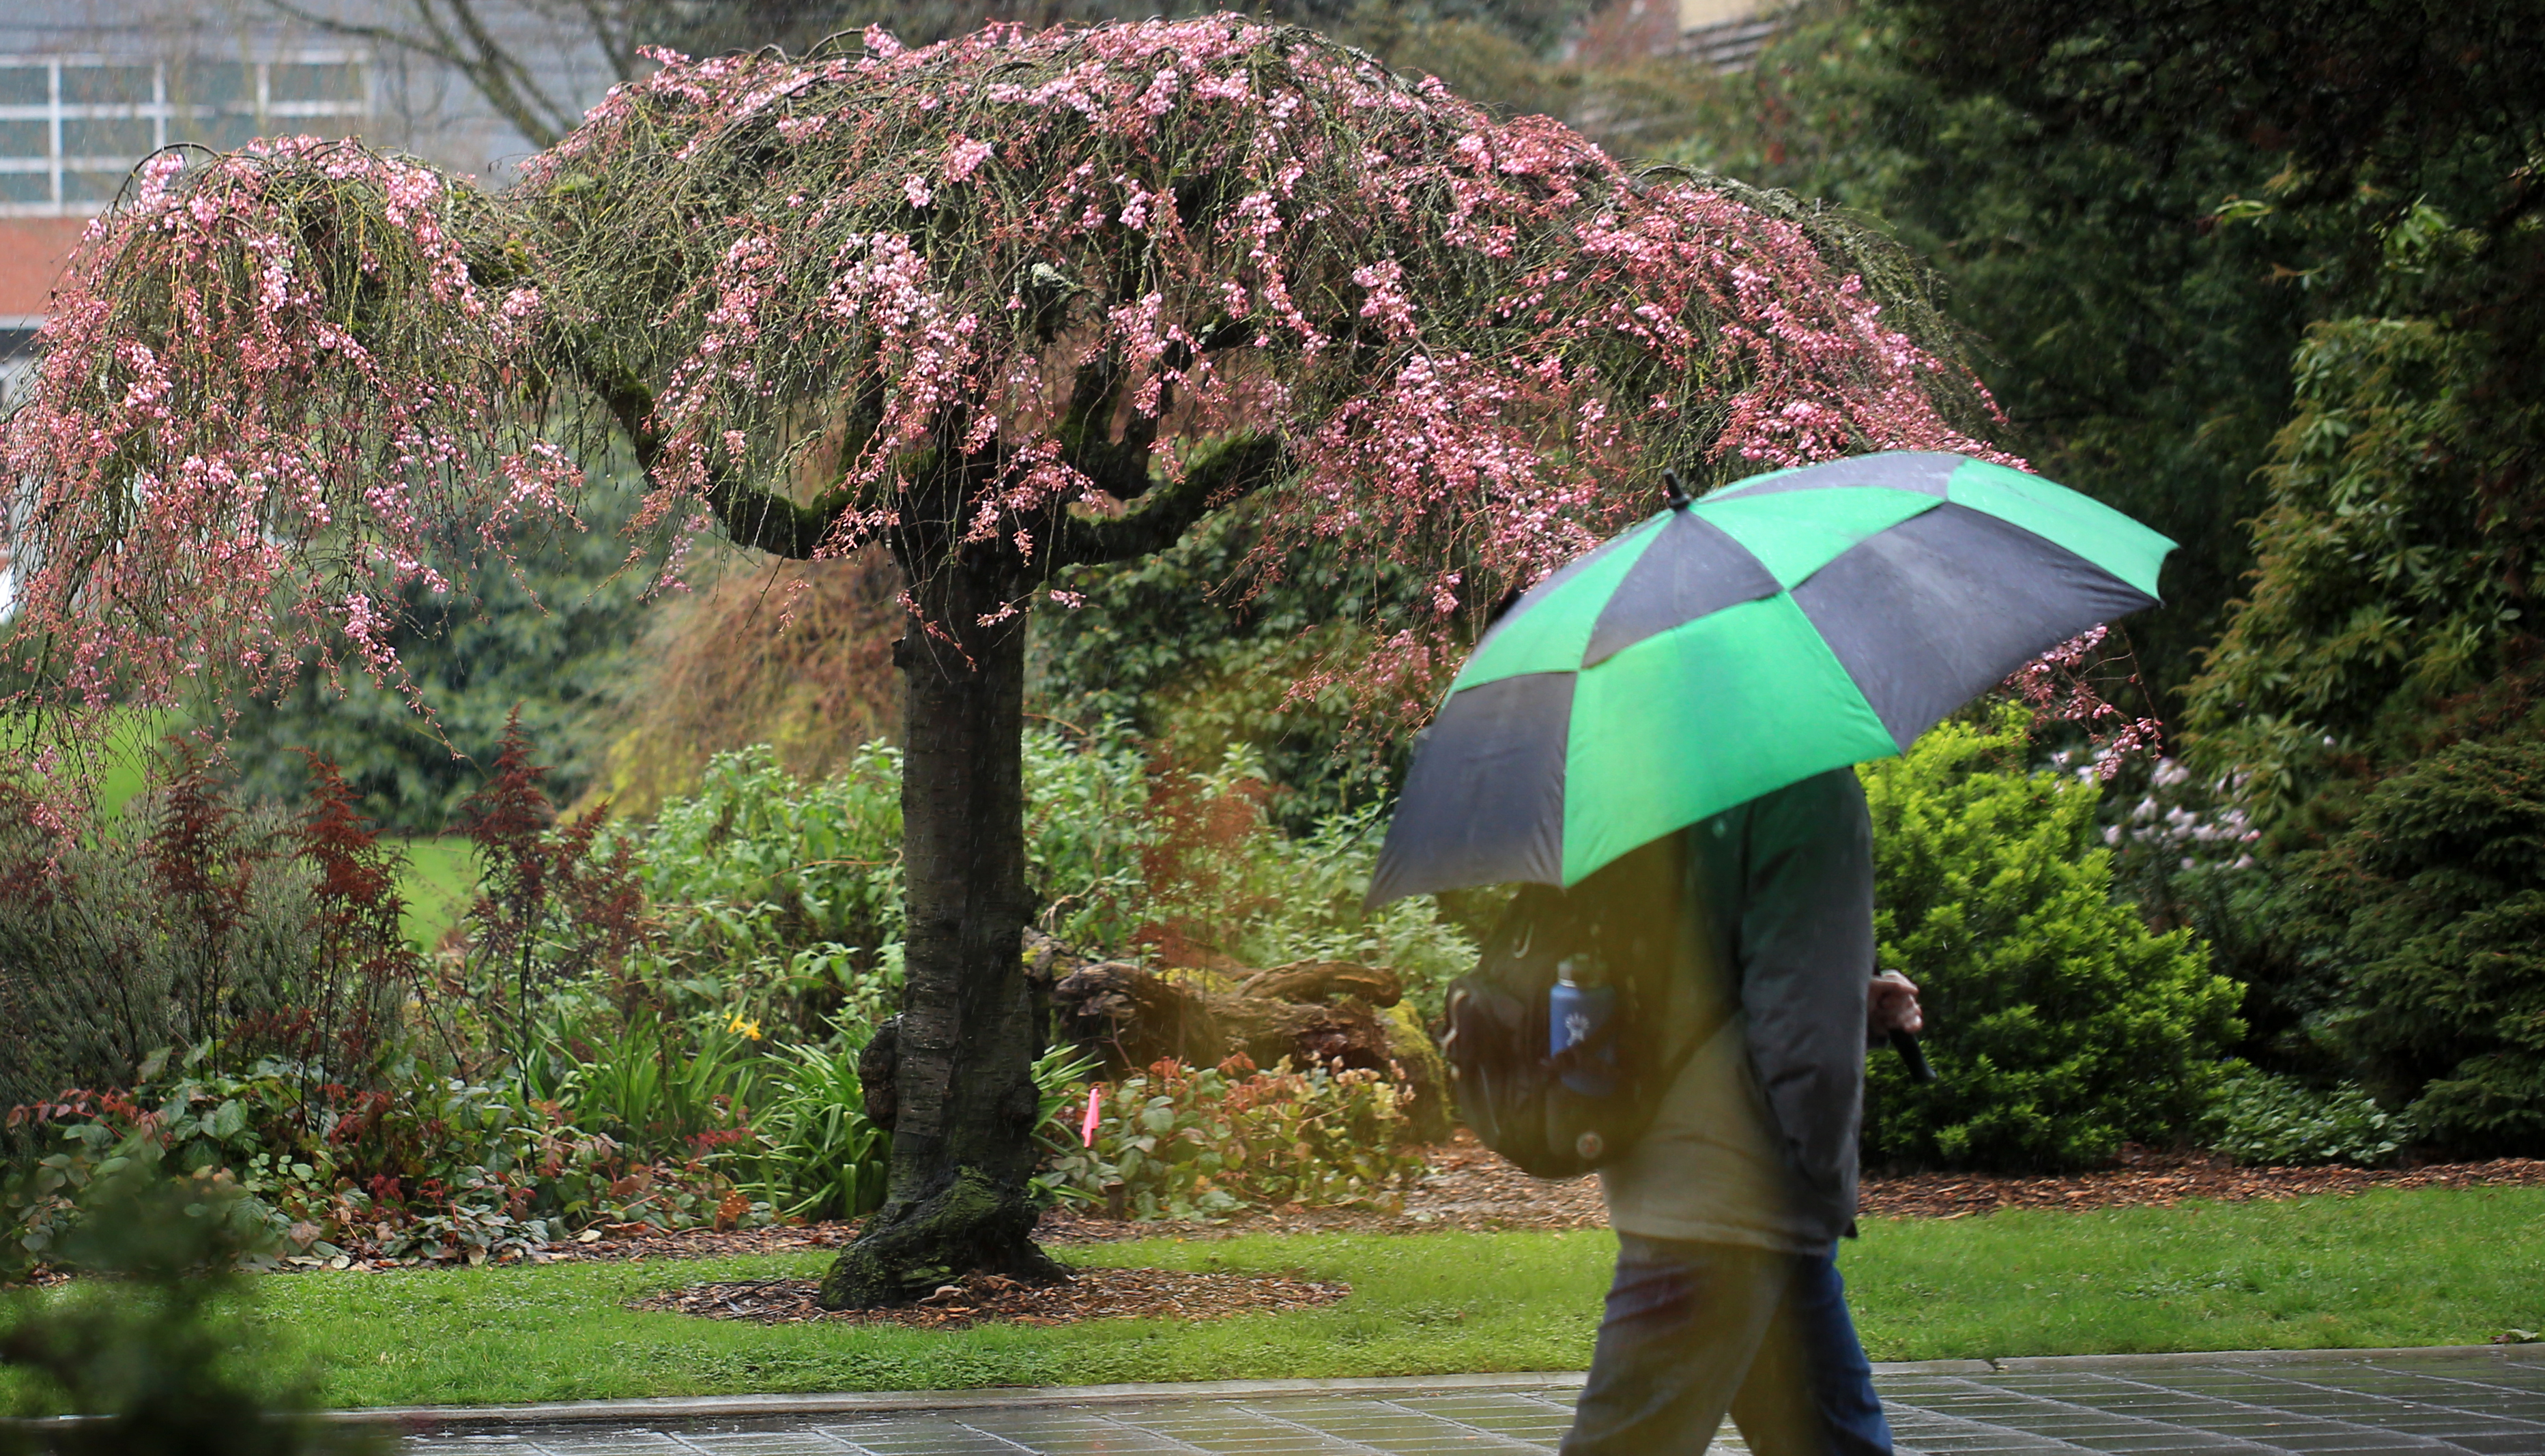 Student walking with umbrella on campus next to cherry blossom trees